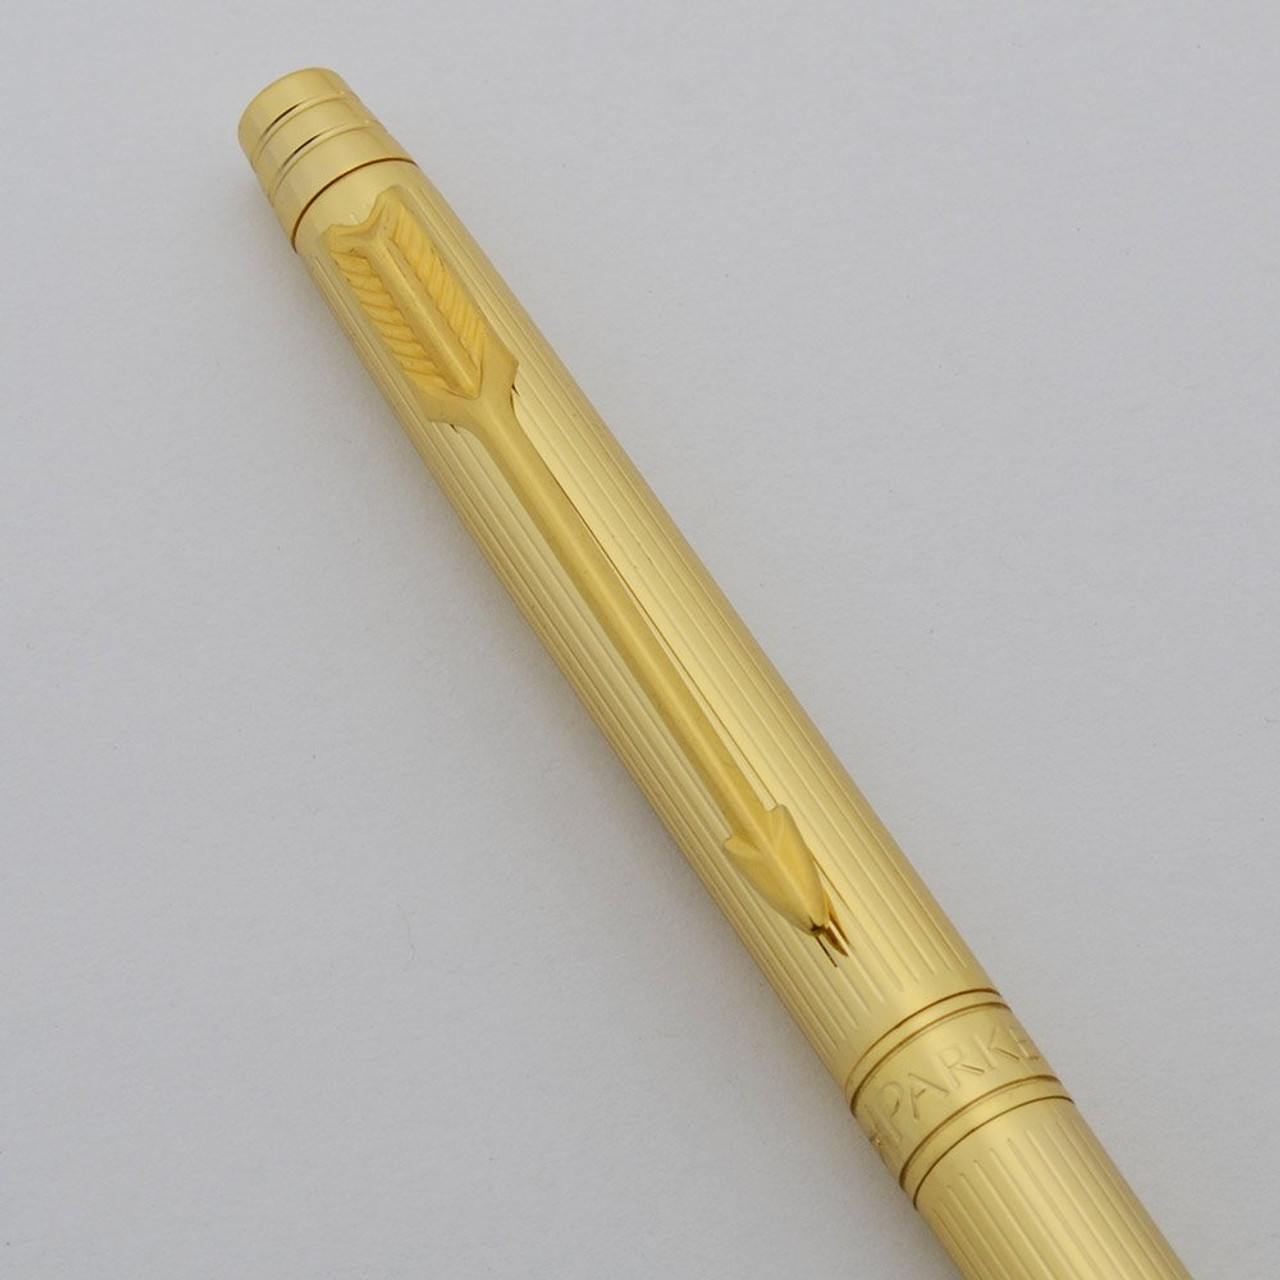 Parker Insignia Classic Twist Ballpoint Pen - Gold Plated with GT (Near Mint, Works Well)